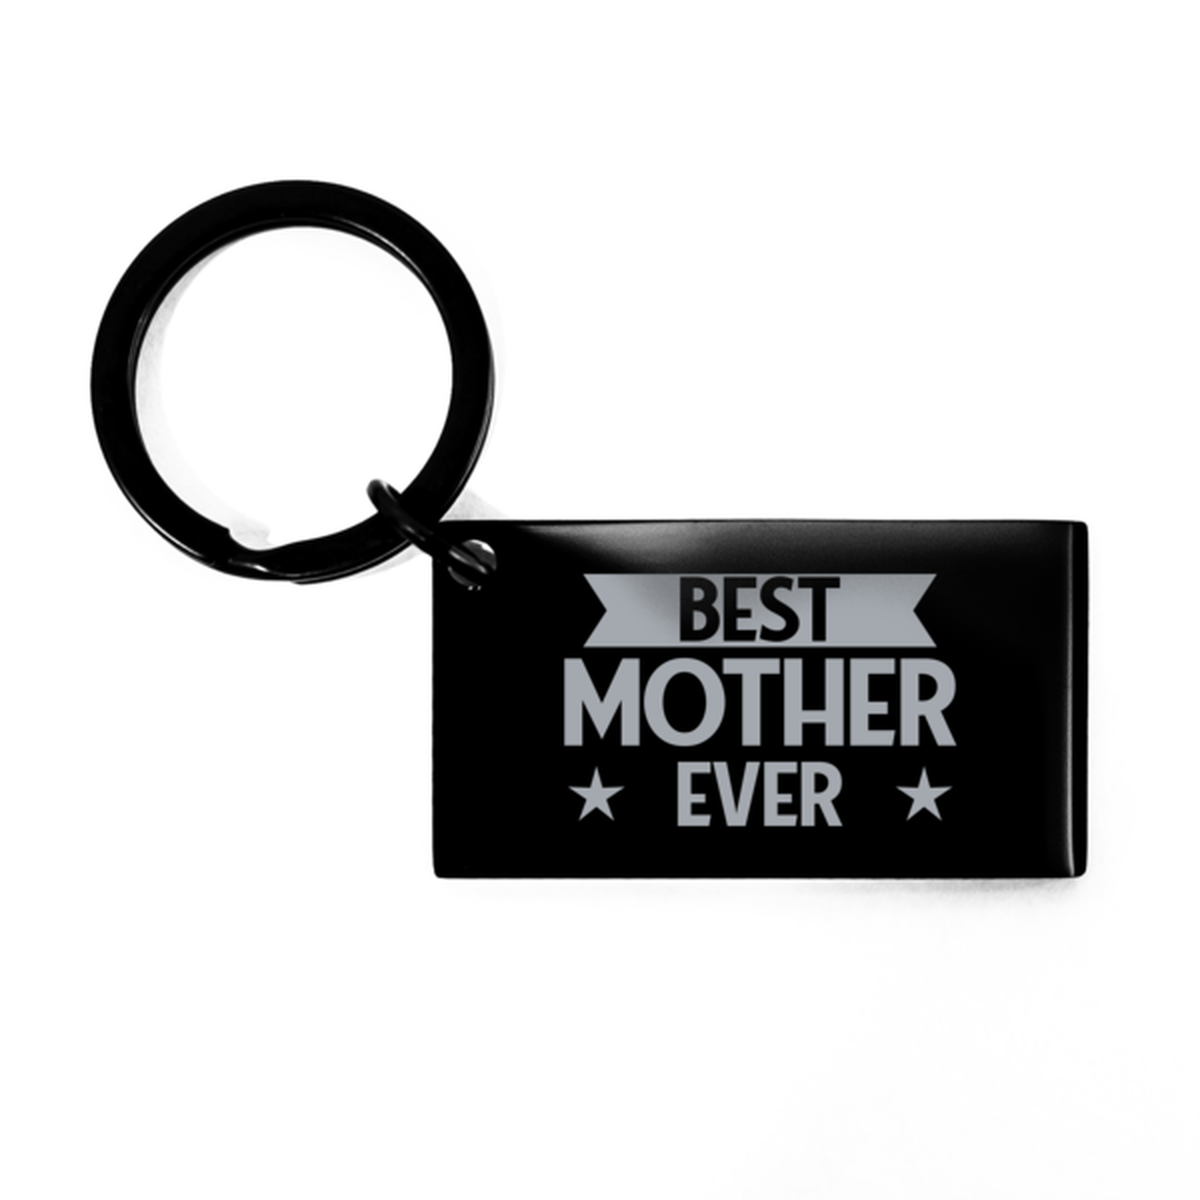 Best Mother Ever Mother Gifts, Funny Black Keychain For Mother, Birthday Engraved Keyring Presents For Women